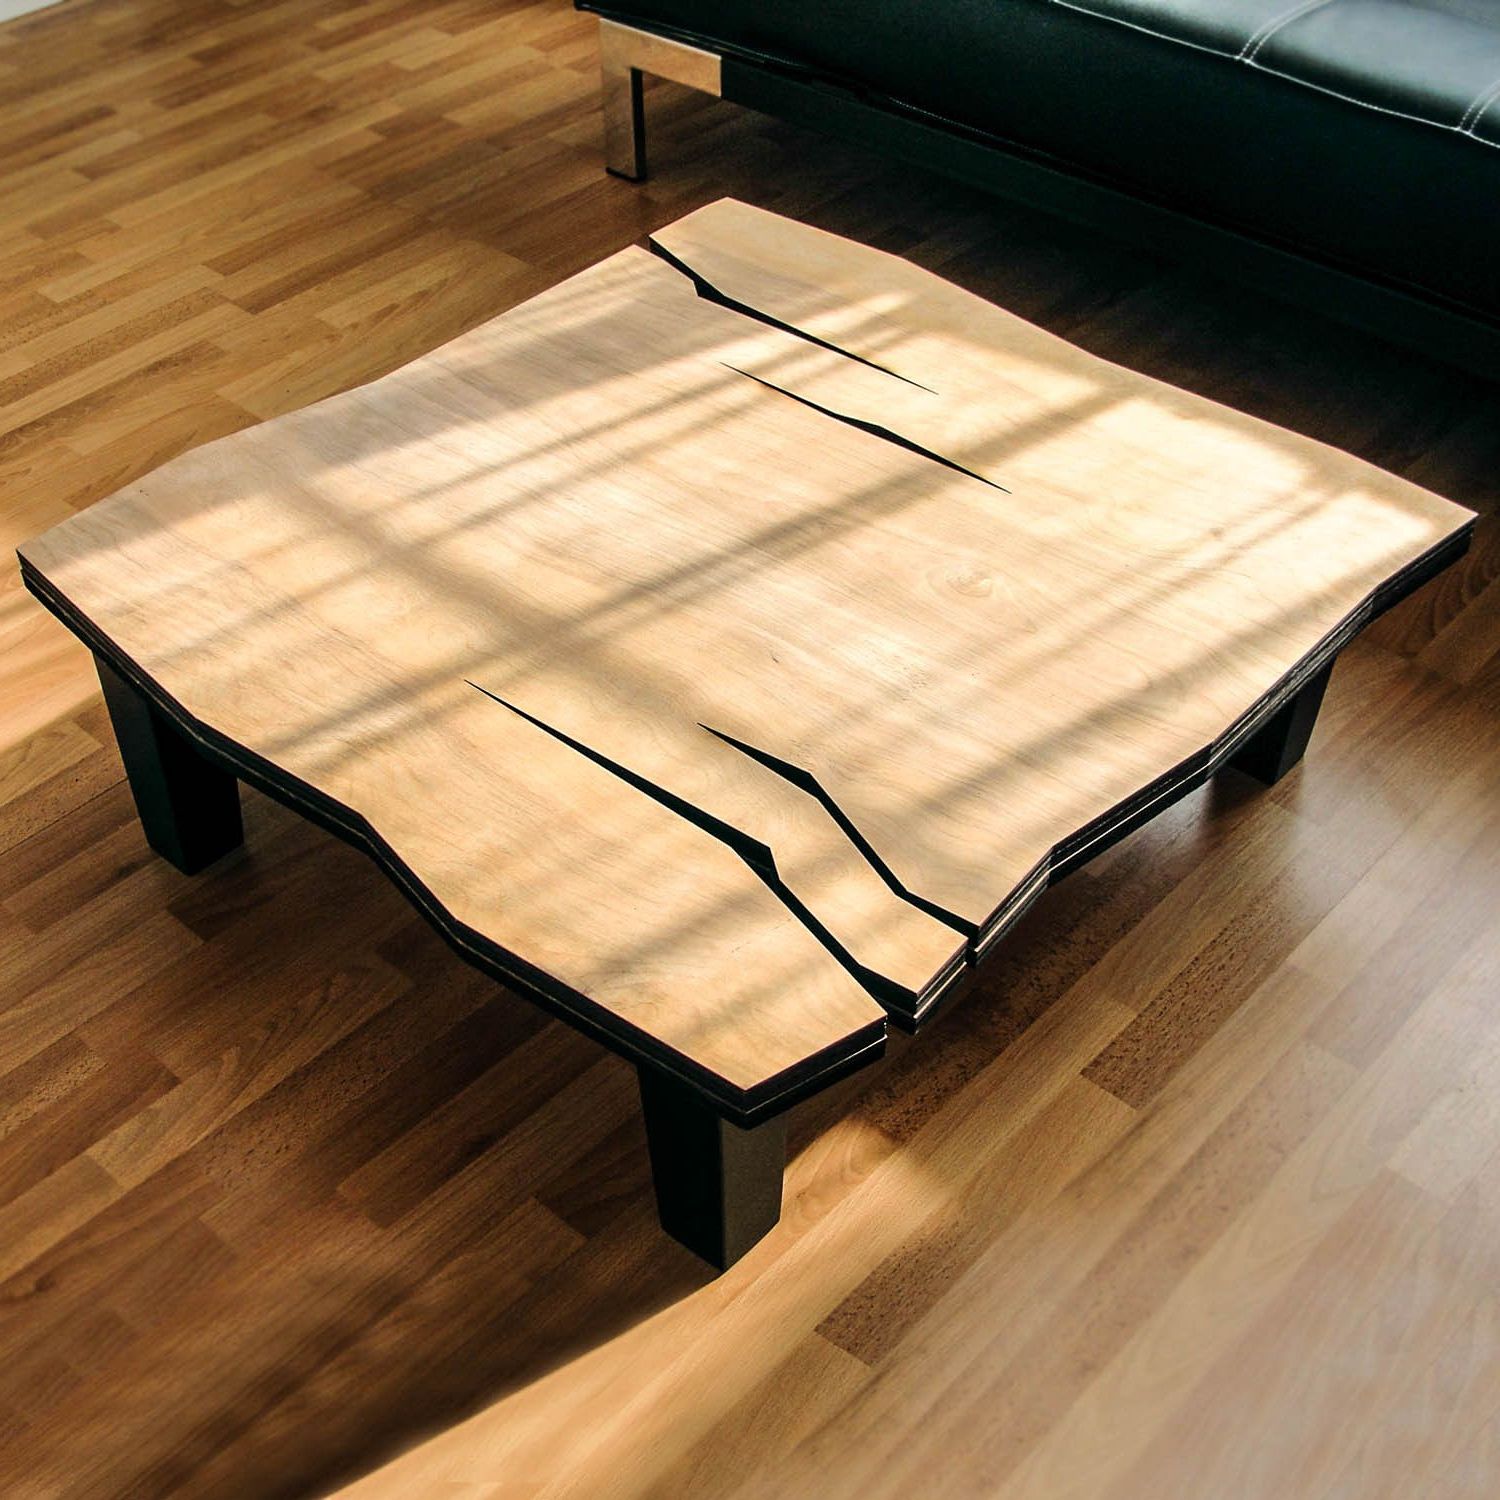 Natural Wood Coffee Table, Natural Coffee Table, Coffee Intended For Most Recent Natural Wood Coffee Tables (View 8 of 20)